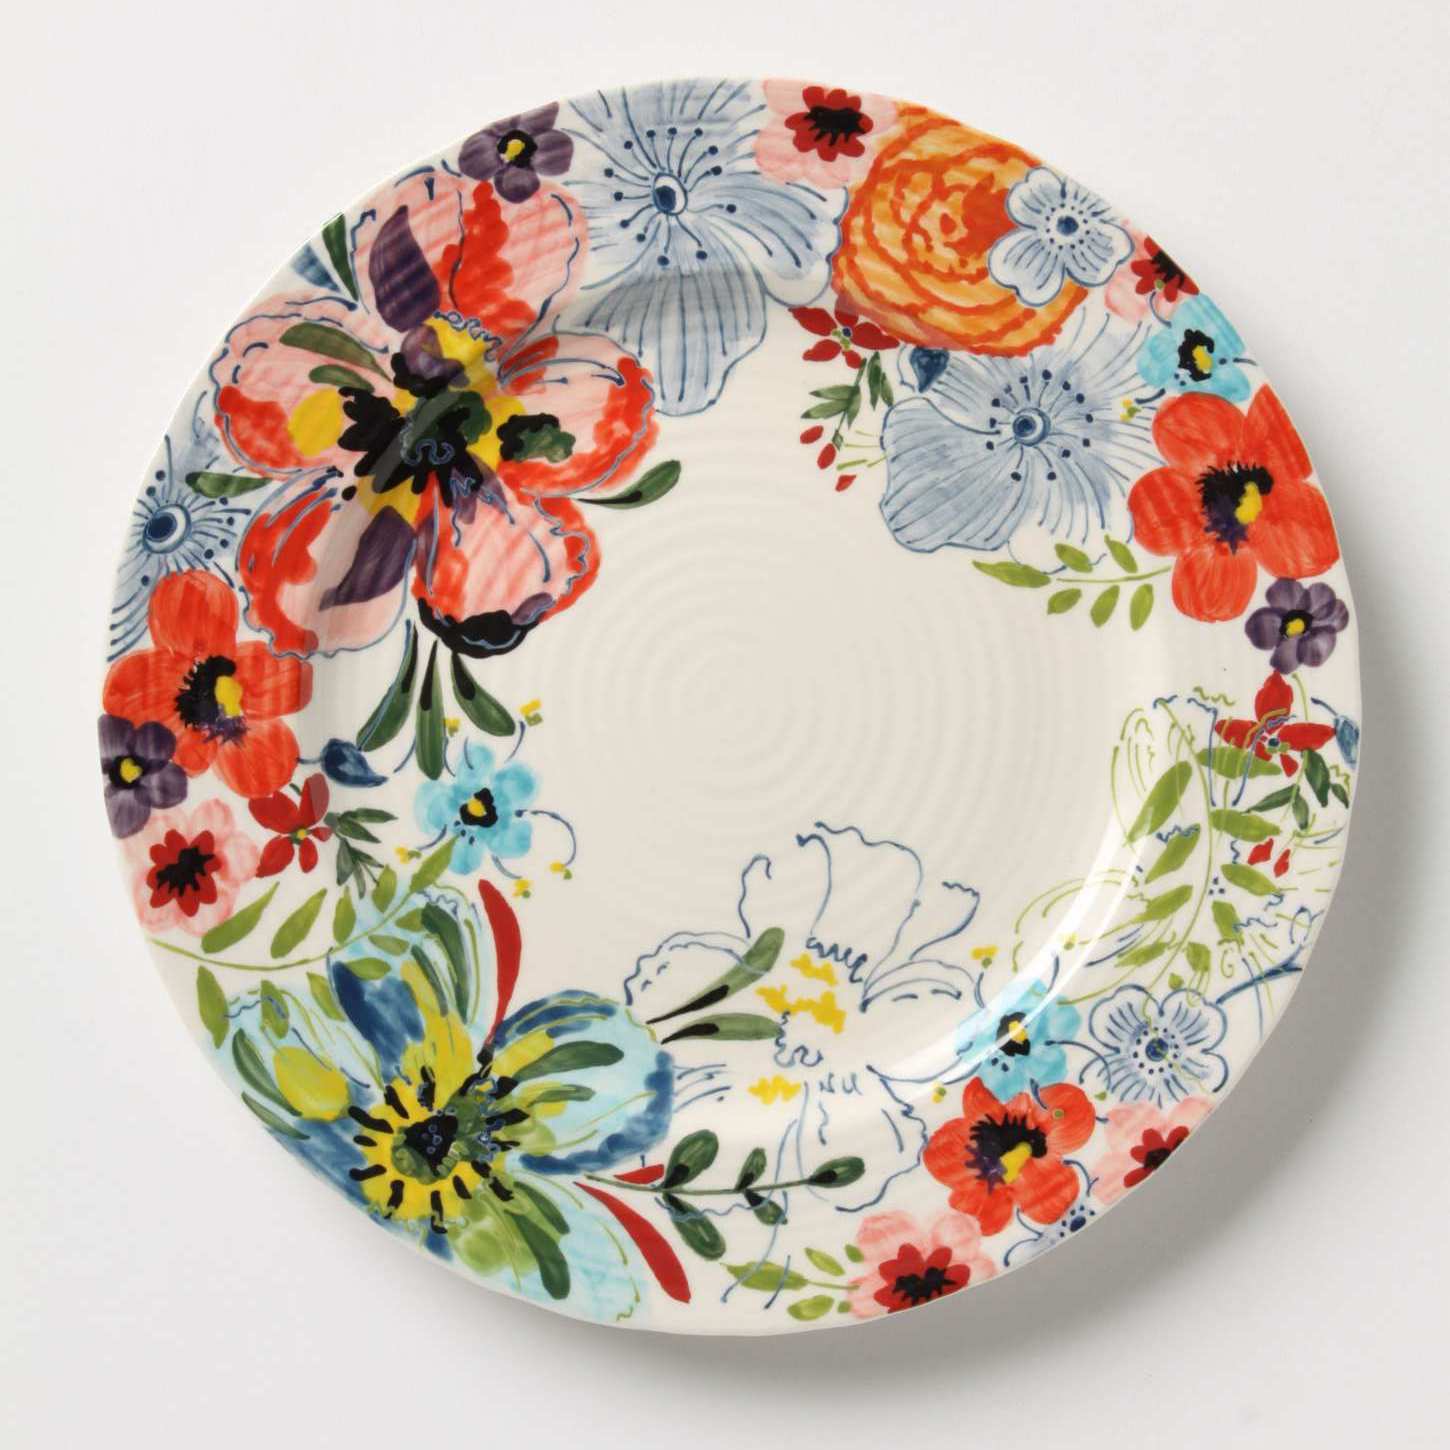  Wall  Flowers Decorative  Plates  in the Dining  Room  Swoon 